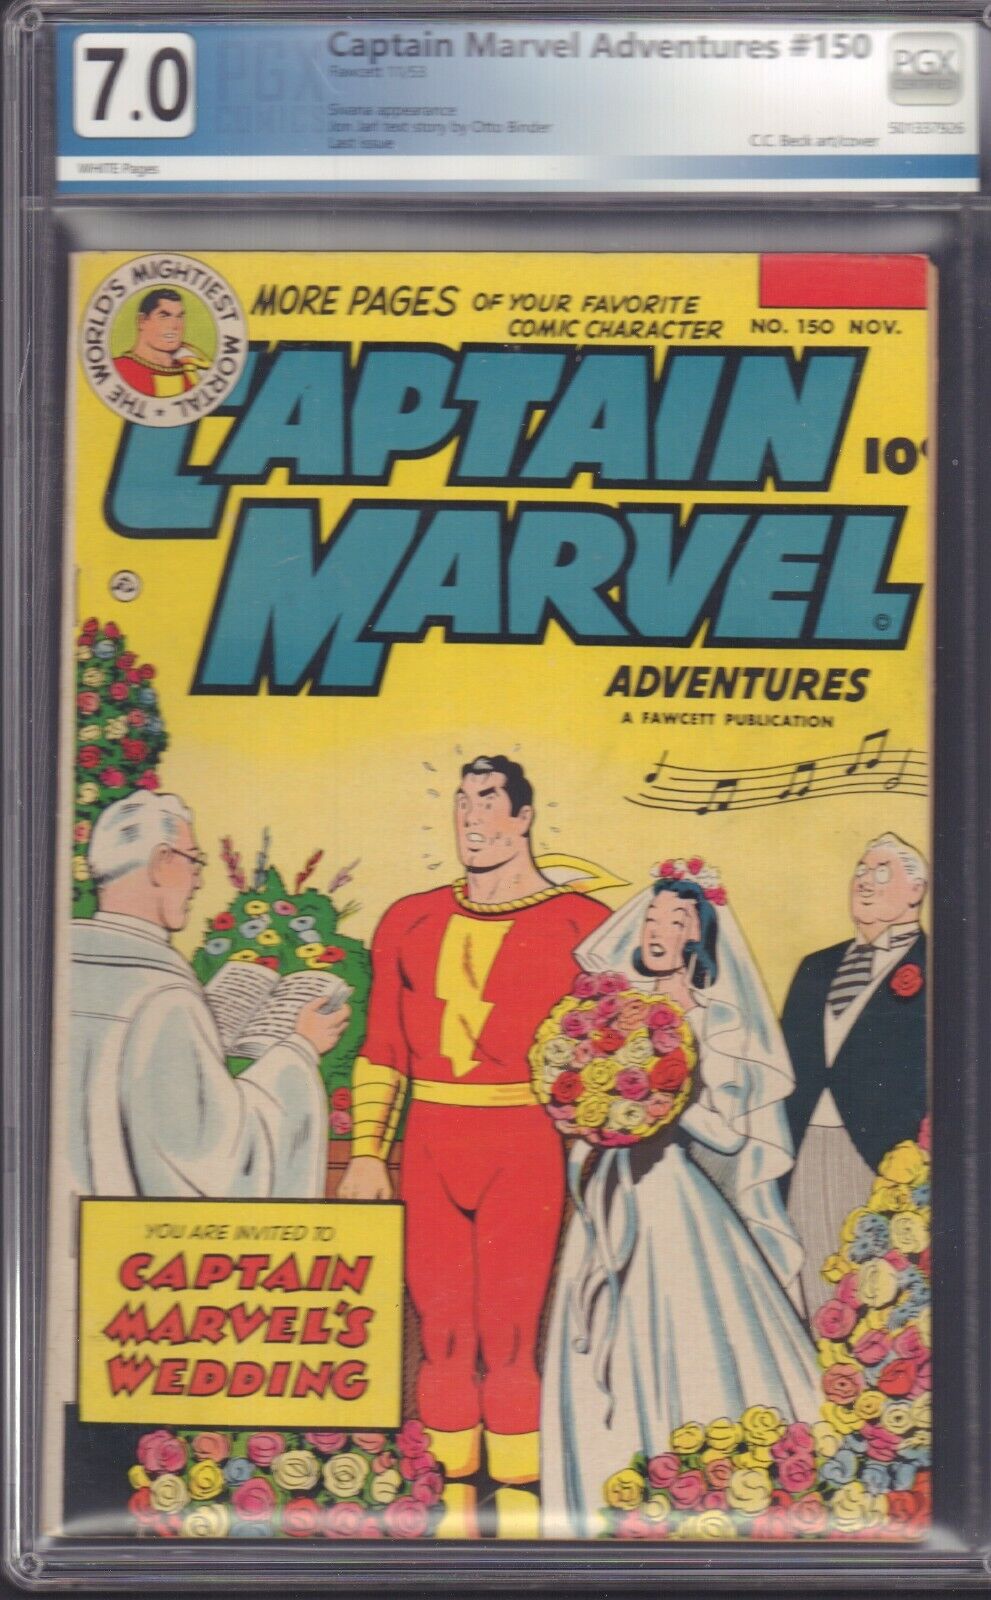 Captain marvel adventures #150    7.0 graded   white pages last issue 